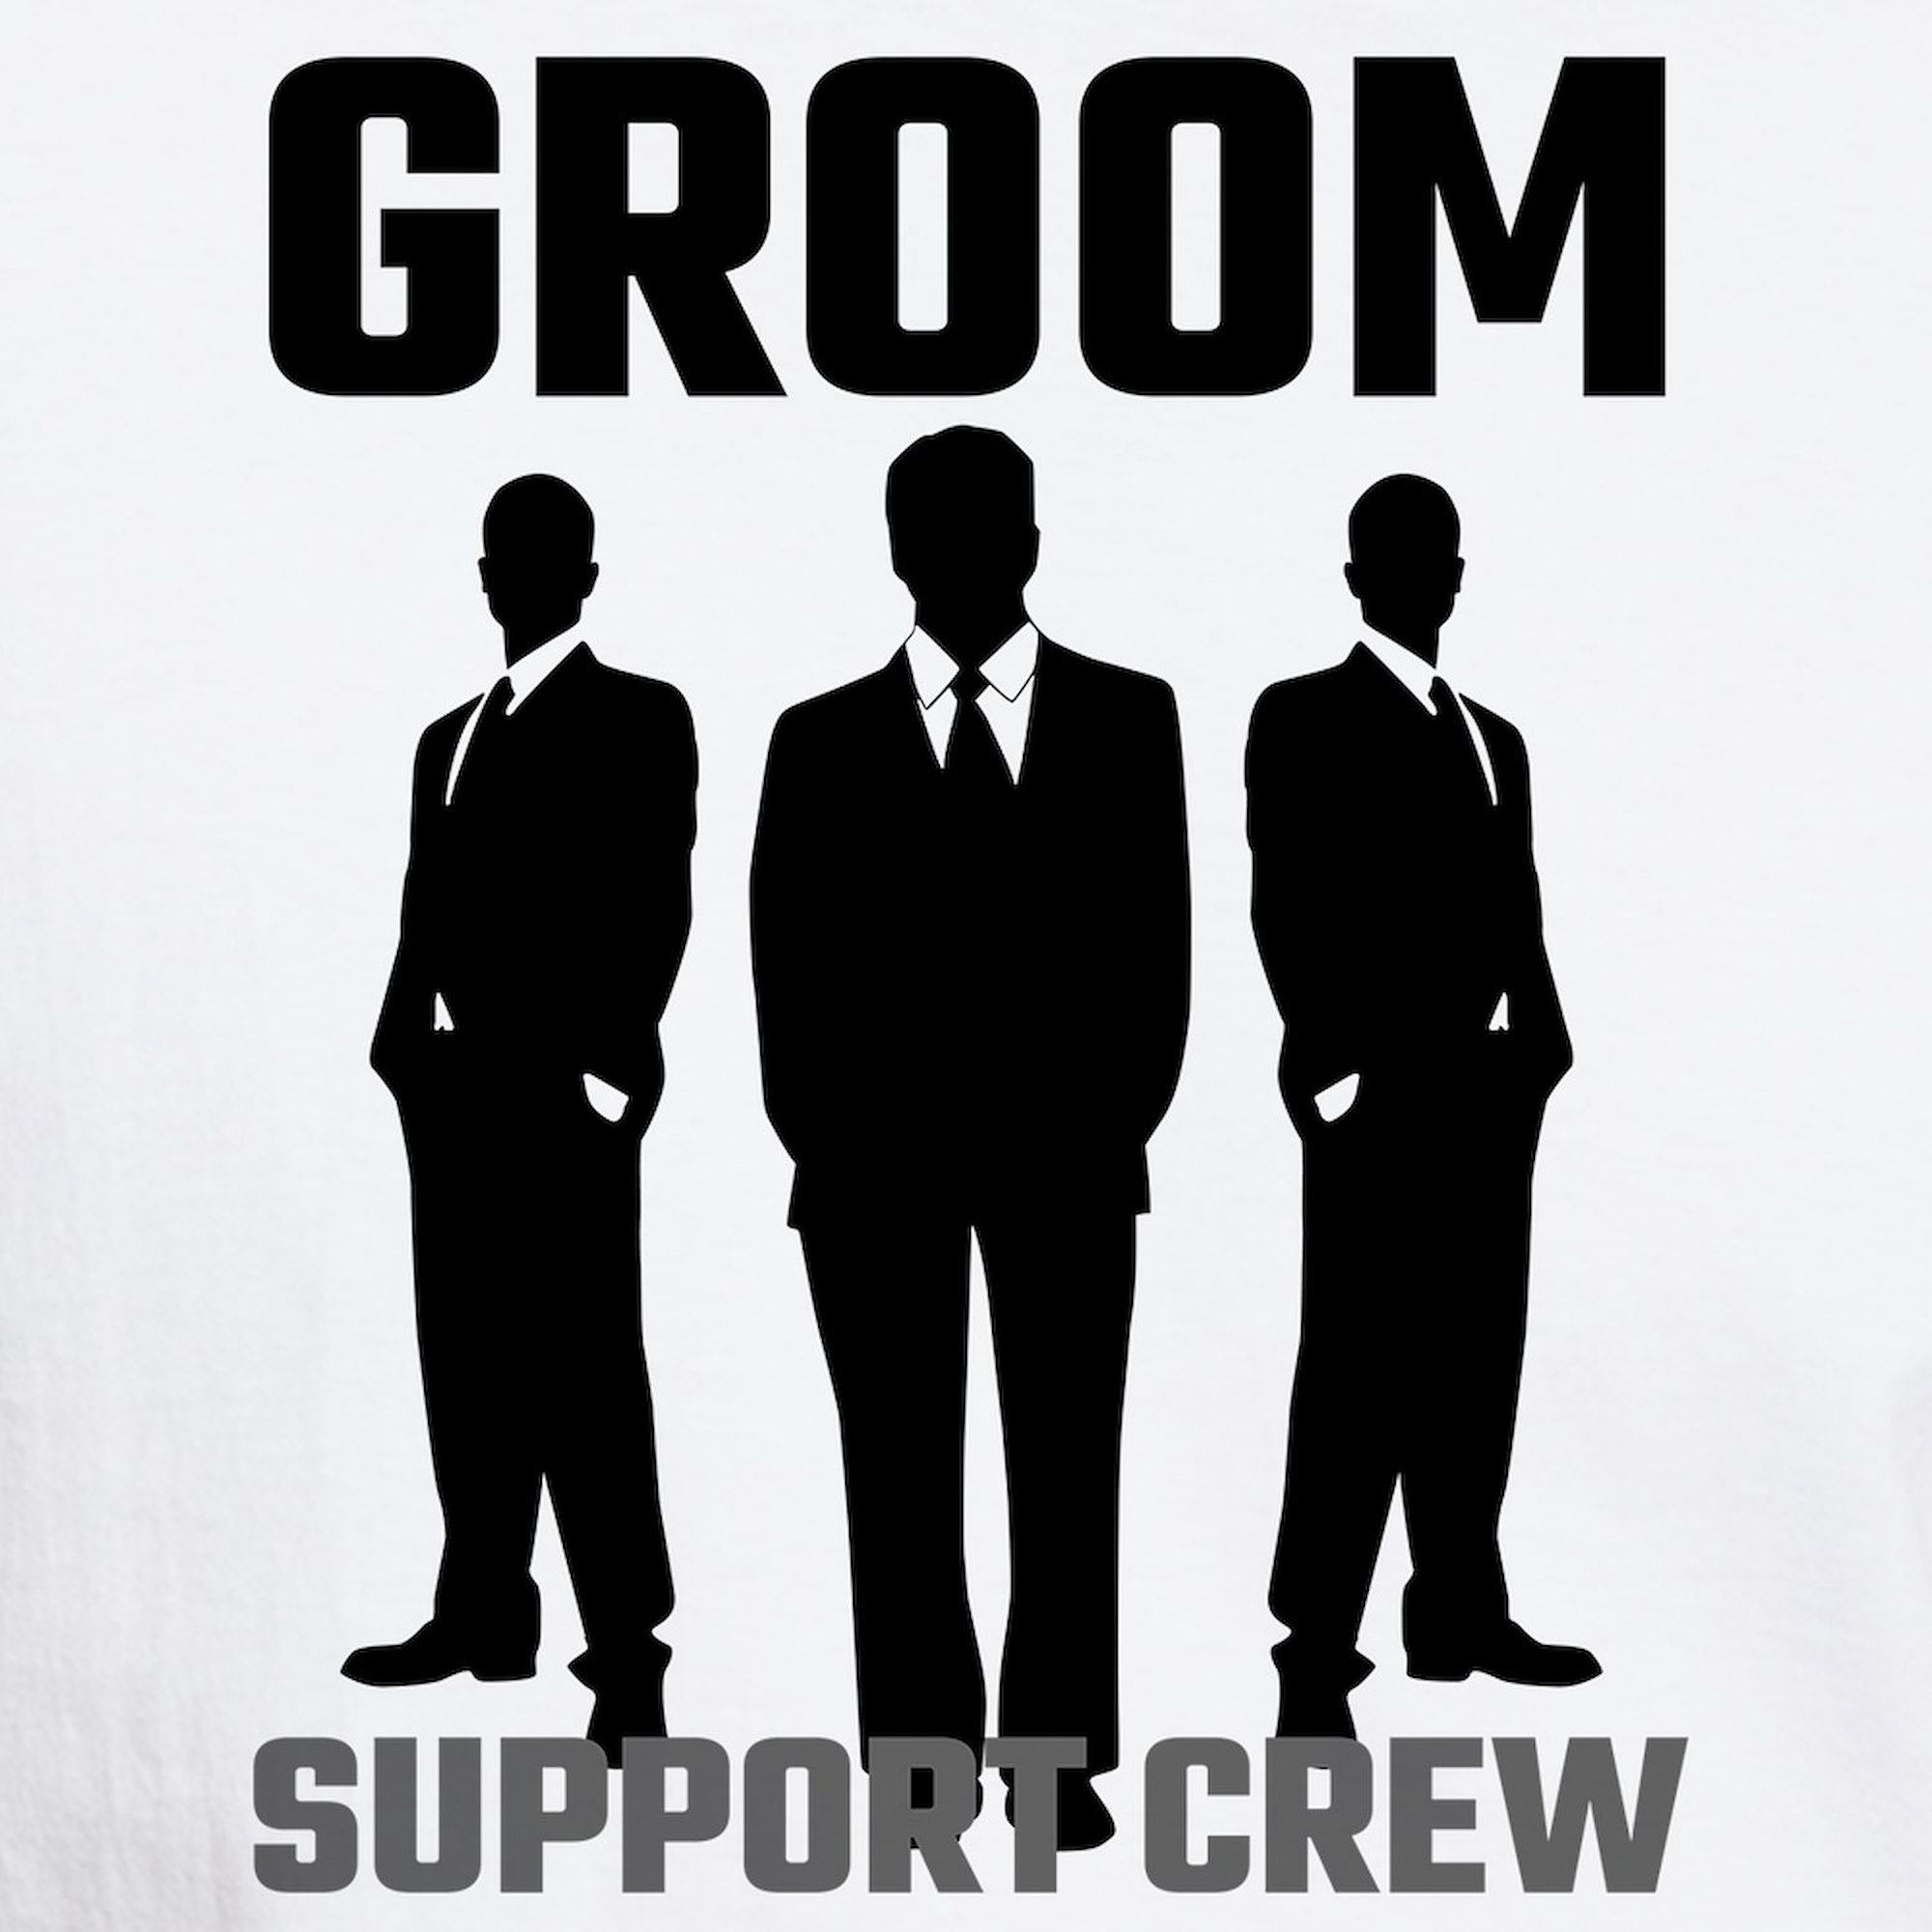 CafePress - Groom Support Crew T Shirt - Men's Classic T-Shirts - image 3 of 4